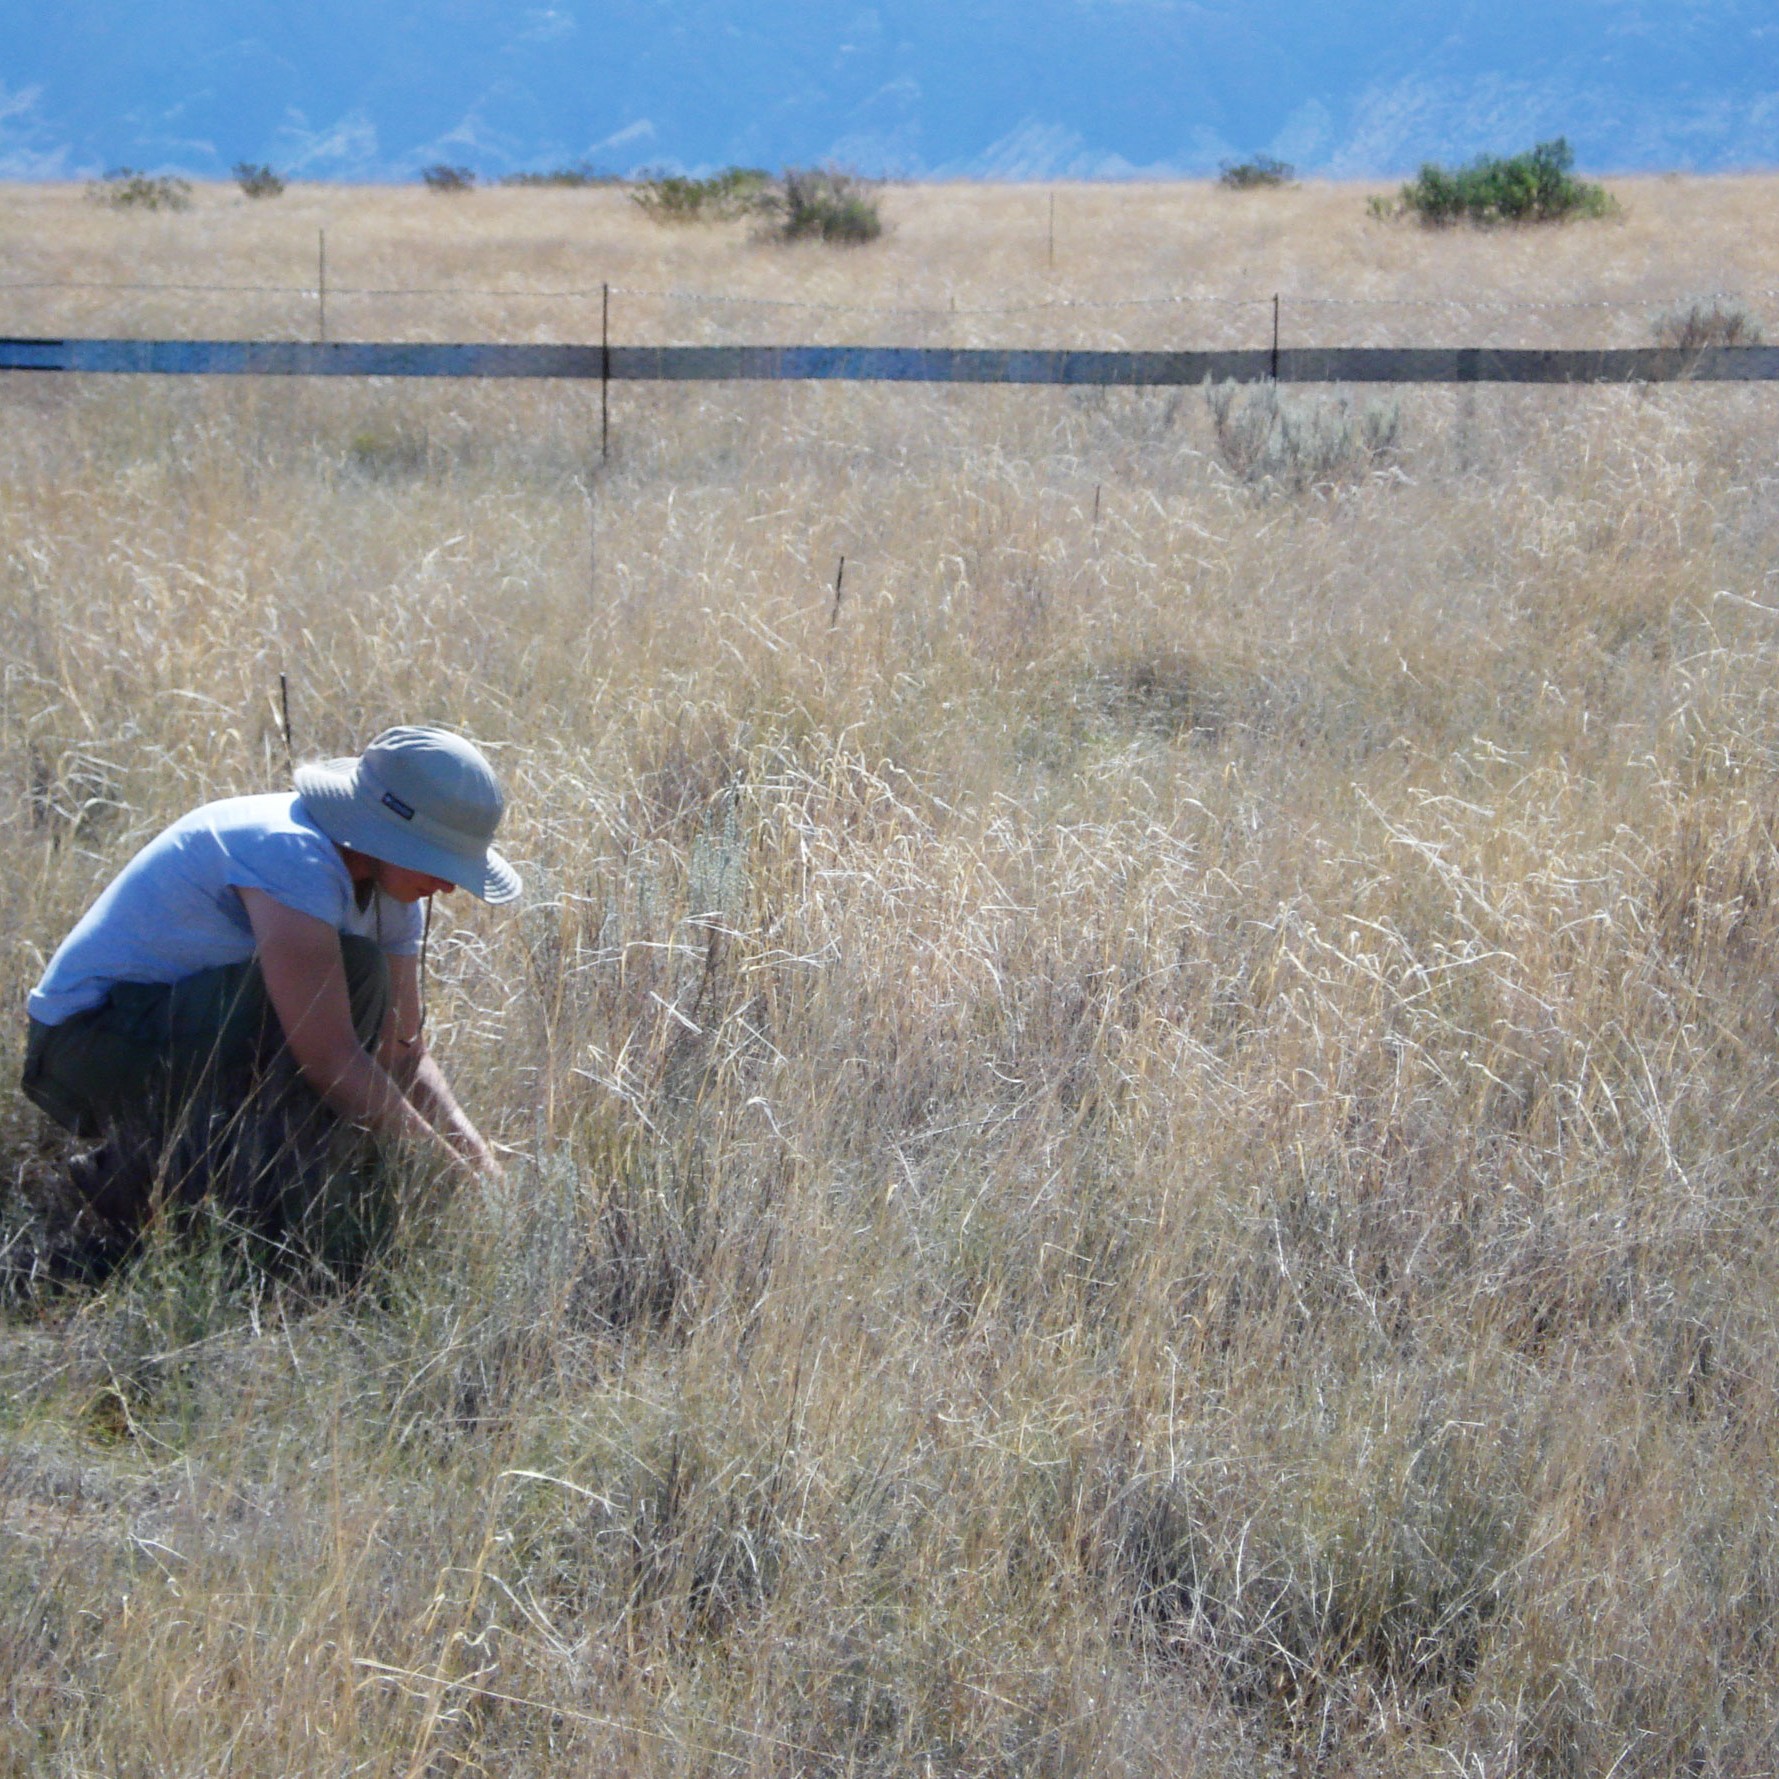 A researcher takes a measurement near a wildlife-excluding span of fence.